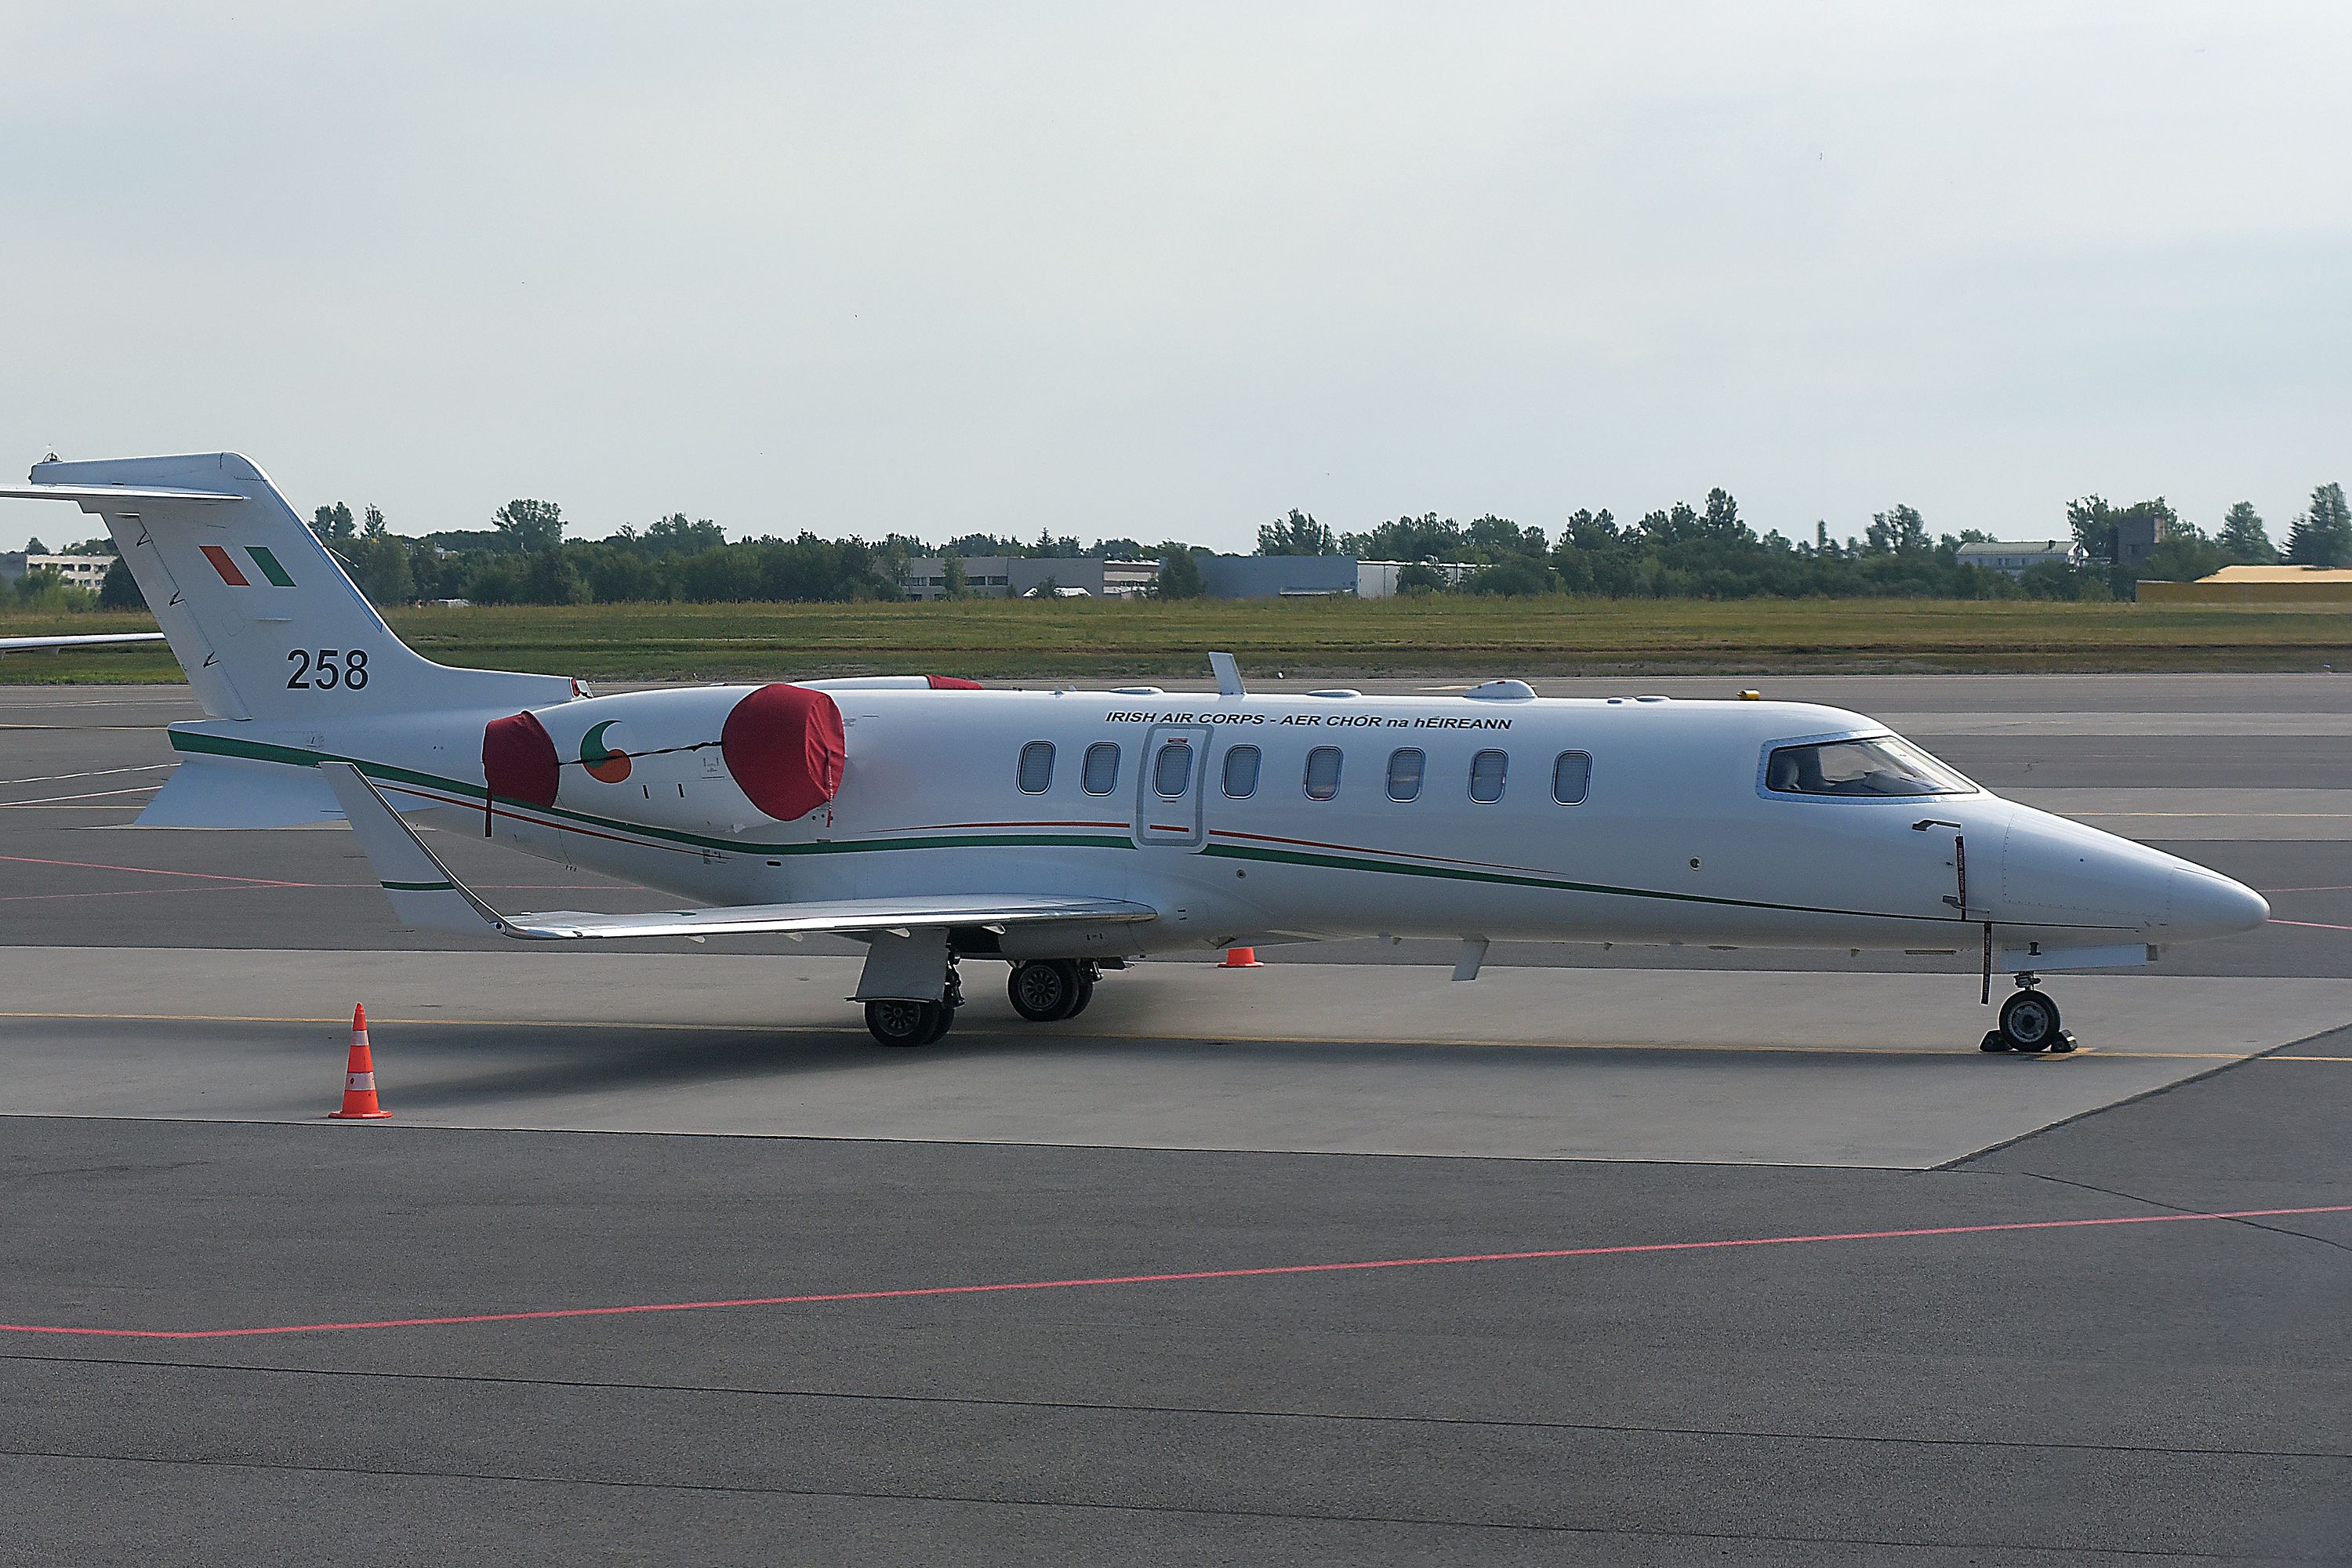 Irish Air Corps Learjet 45 parked at VNO airport